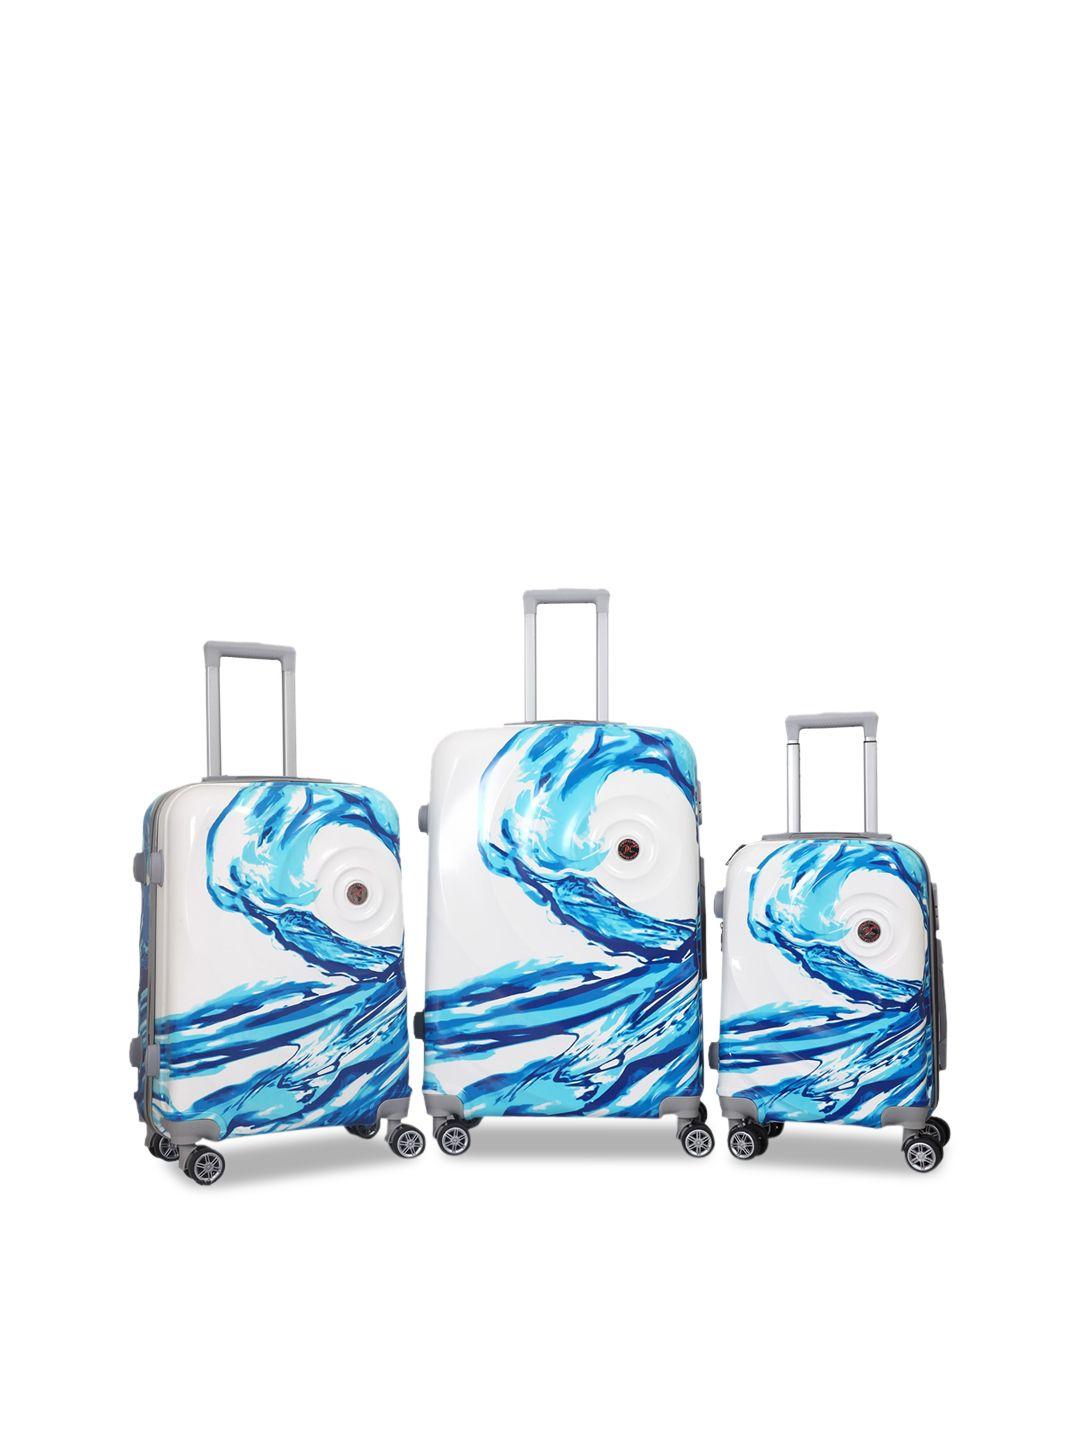 polo class set of 3 hard-sided trolley suitcases